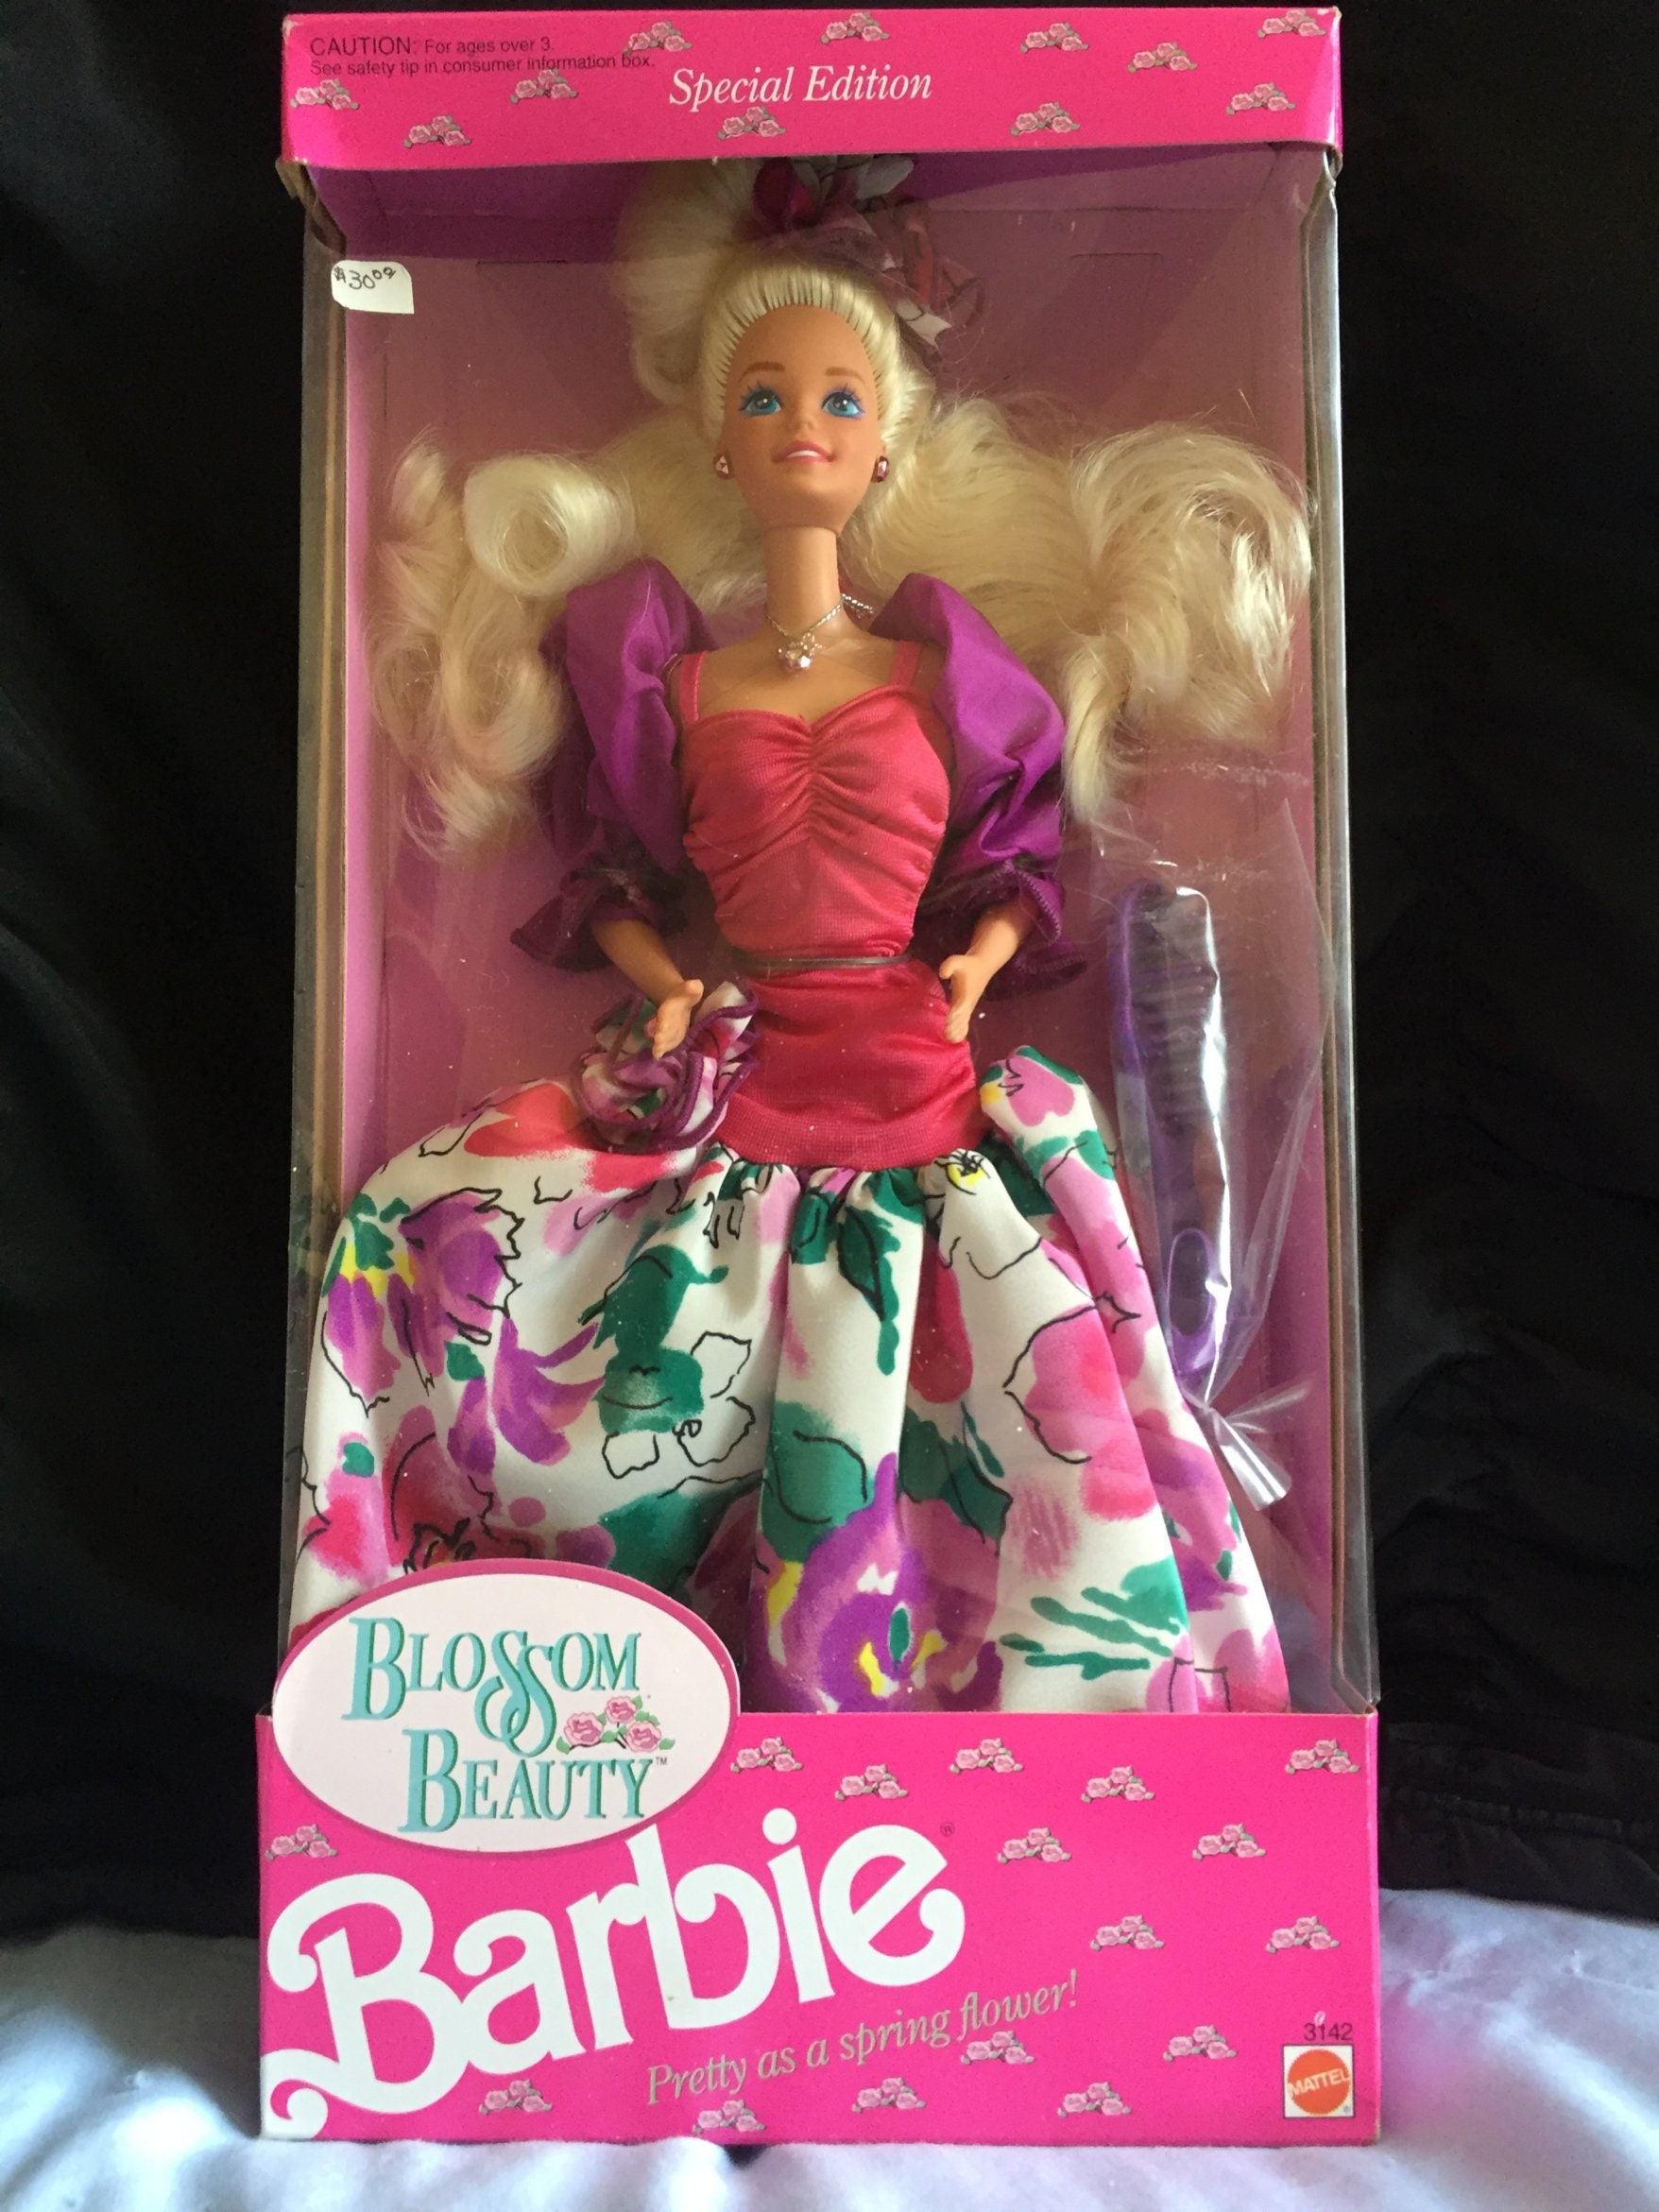 audit speer Correlaat Blossom Beauty Barbie 1991 Special Edition Vintage New in Box - Etsy